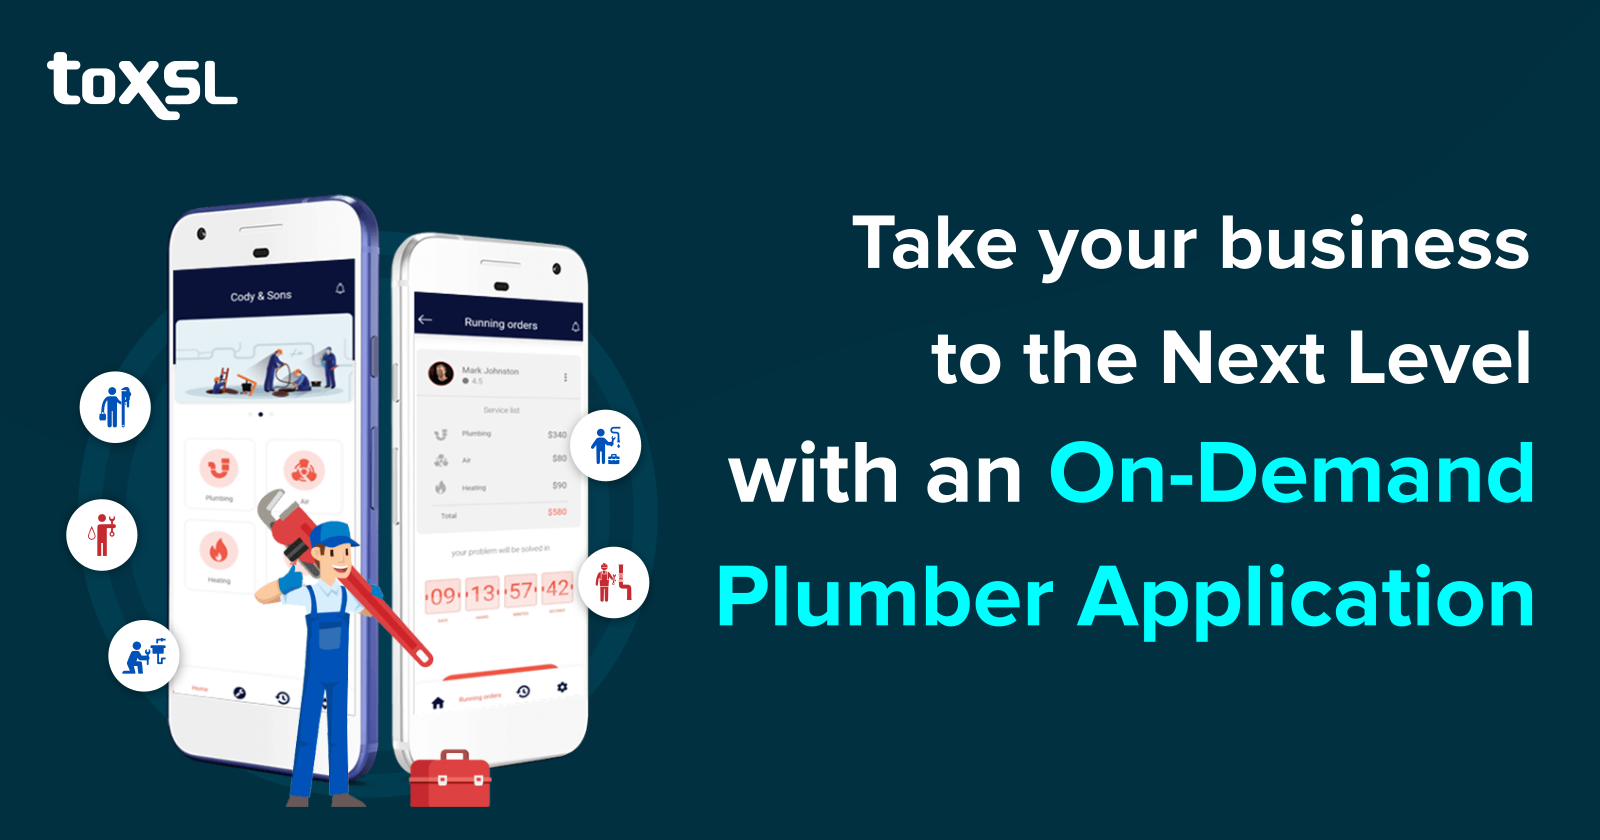 Take Your Business to the Next Level with an On-demand Plumber Application